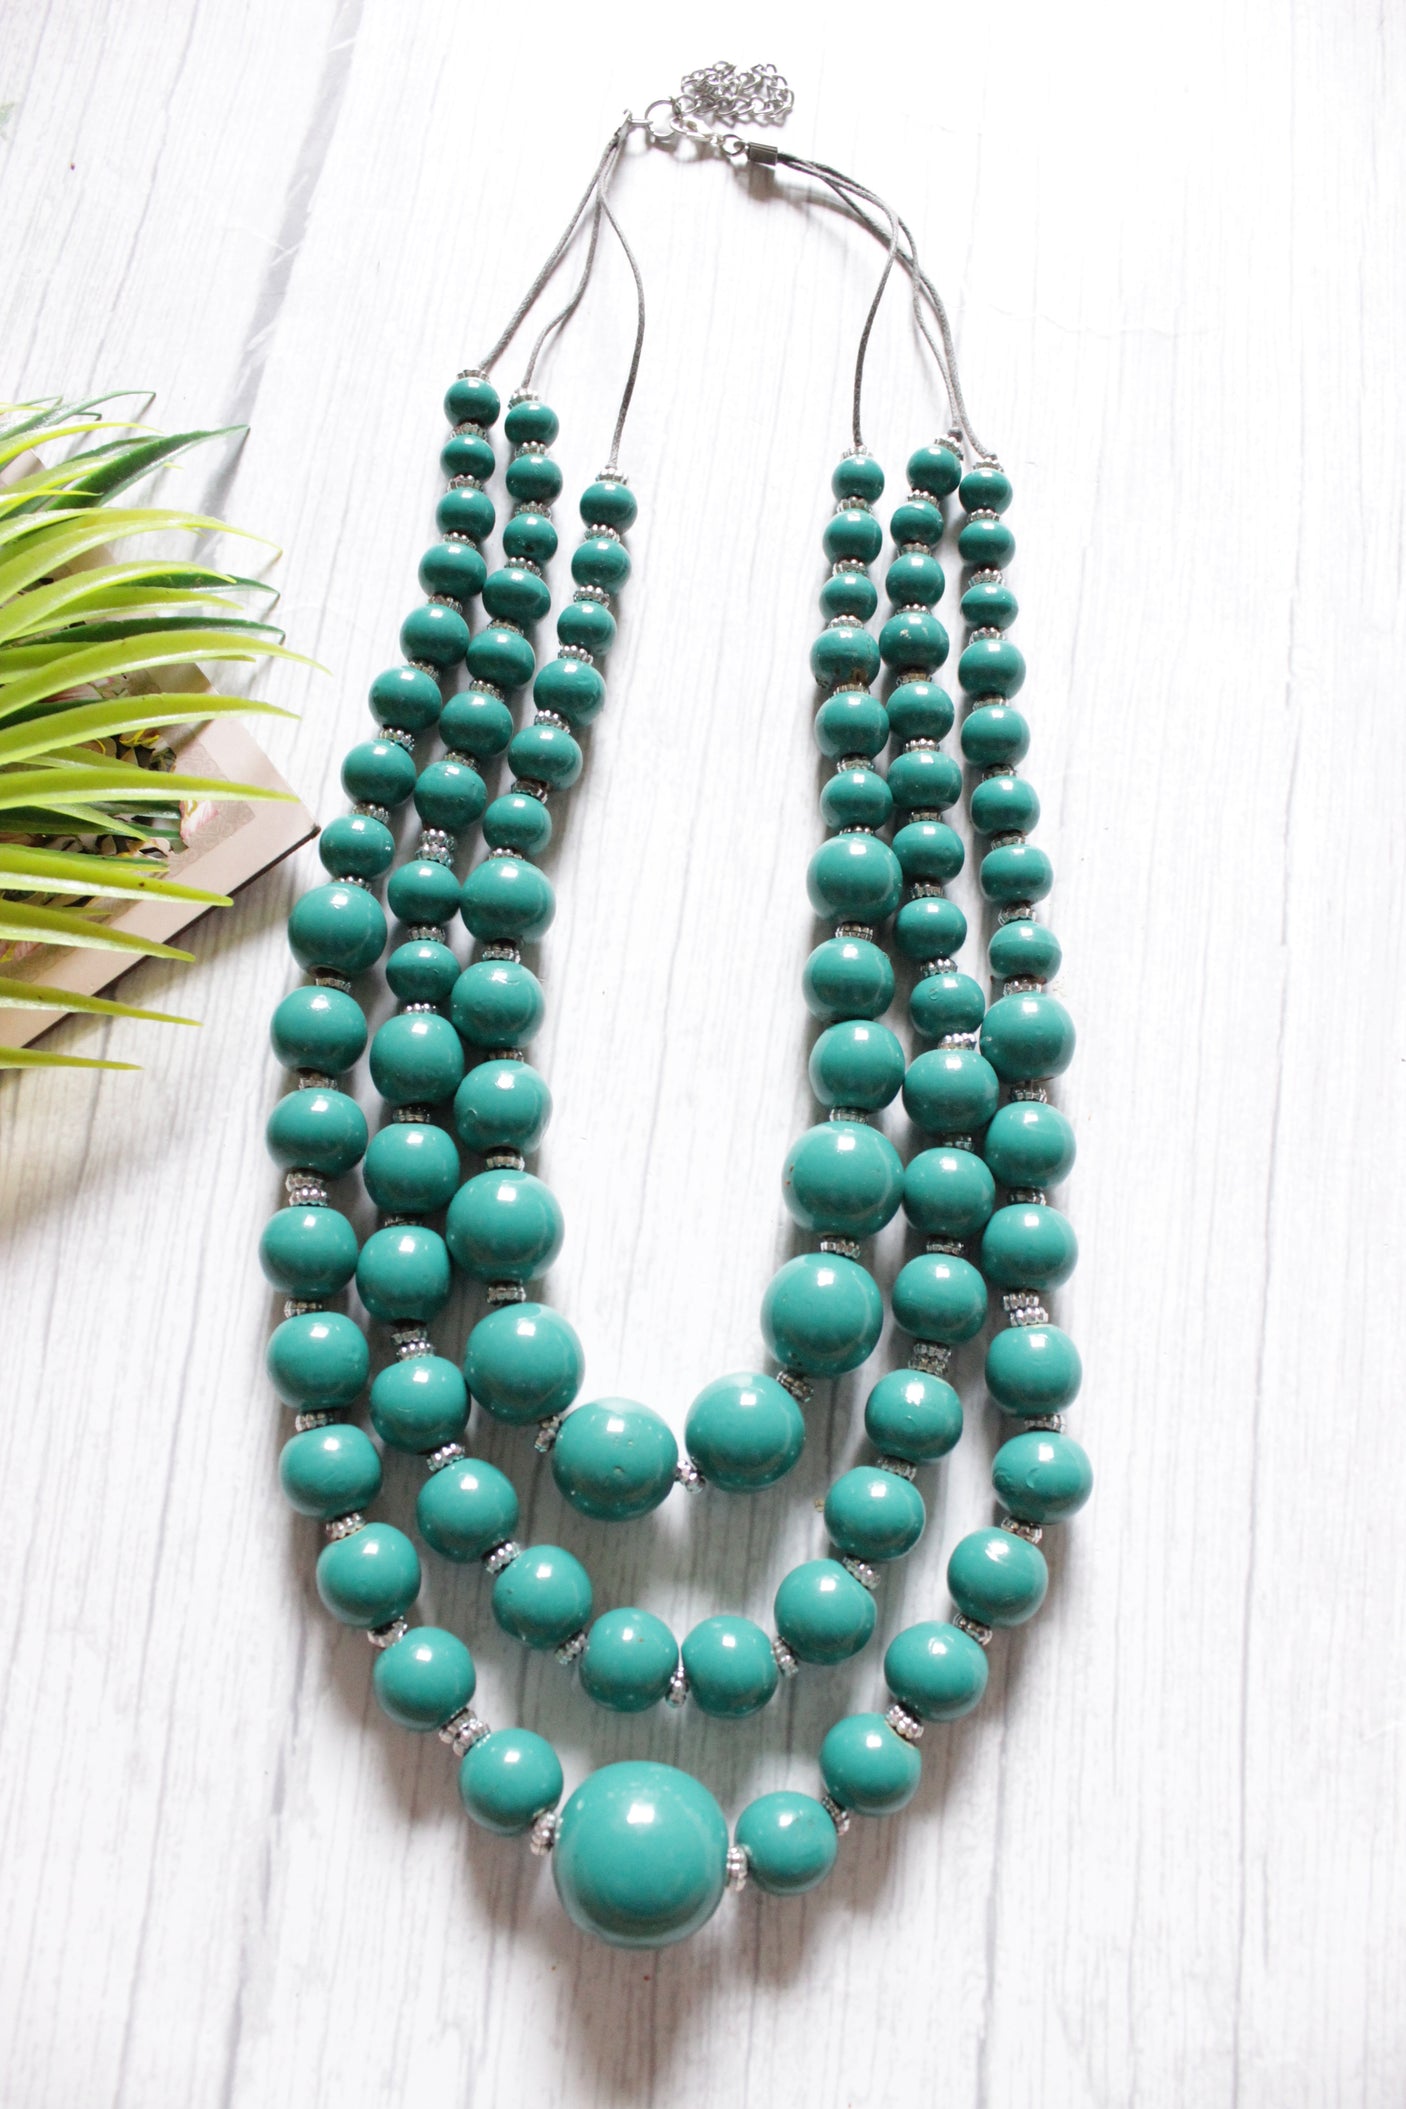 Turquoise Circular Acrylic Beads 3 Layer Necklace